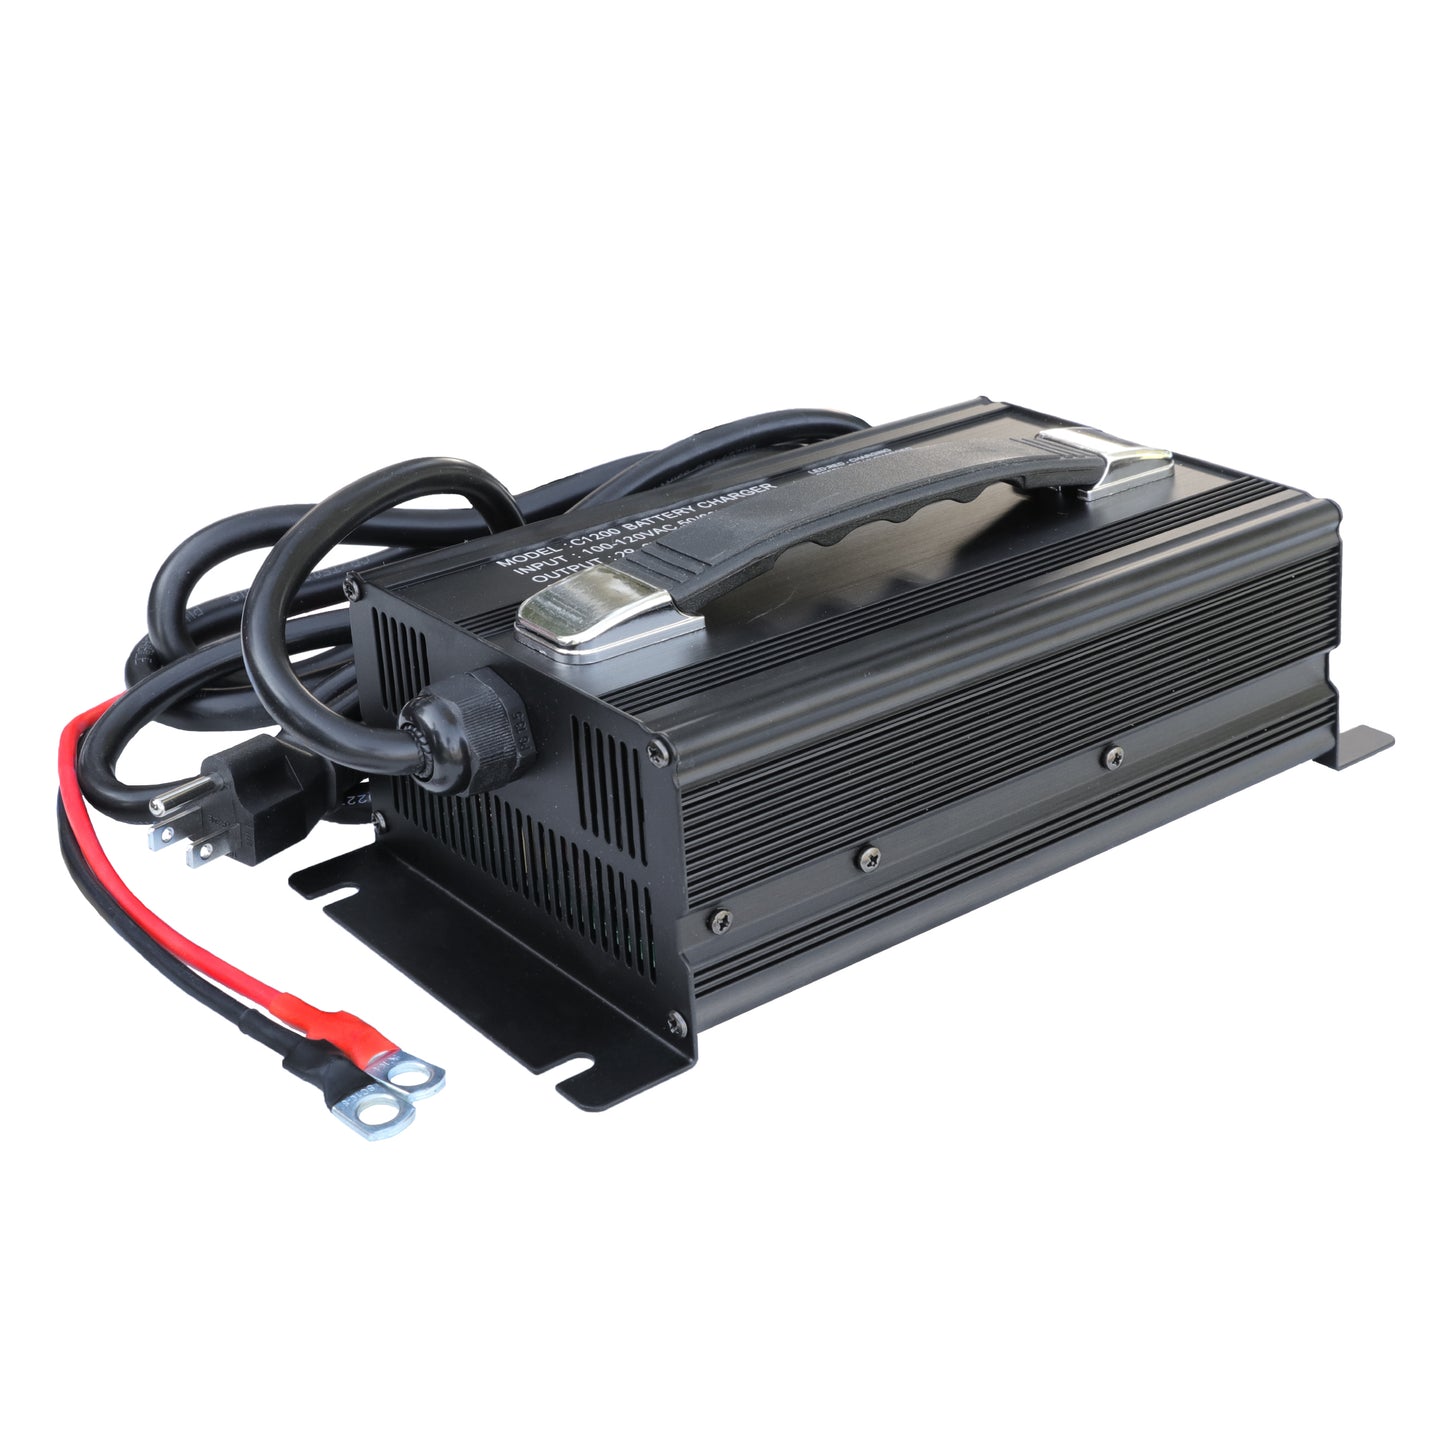 MillerTech 24V 30A Lithium Iron Phosphate Battery Charger (2430C)